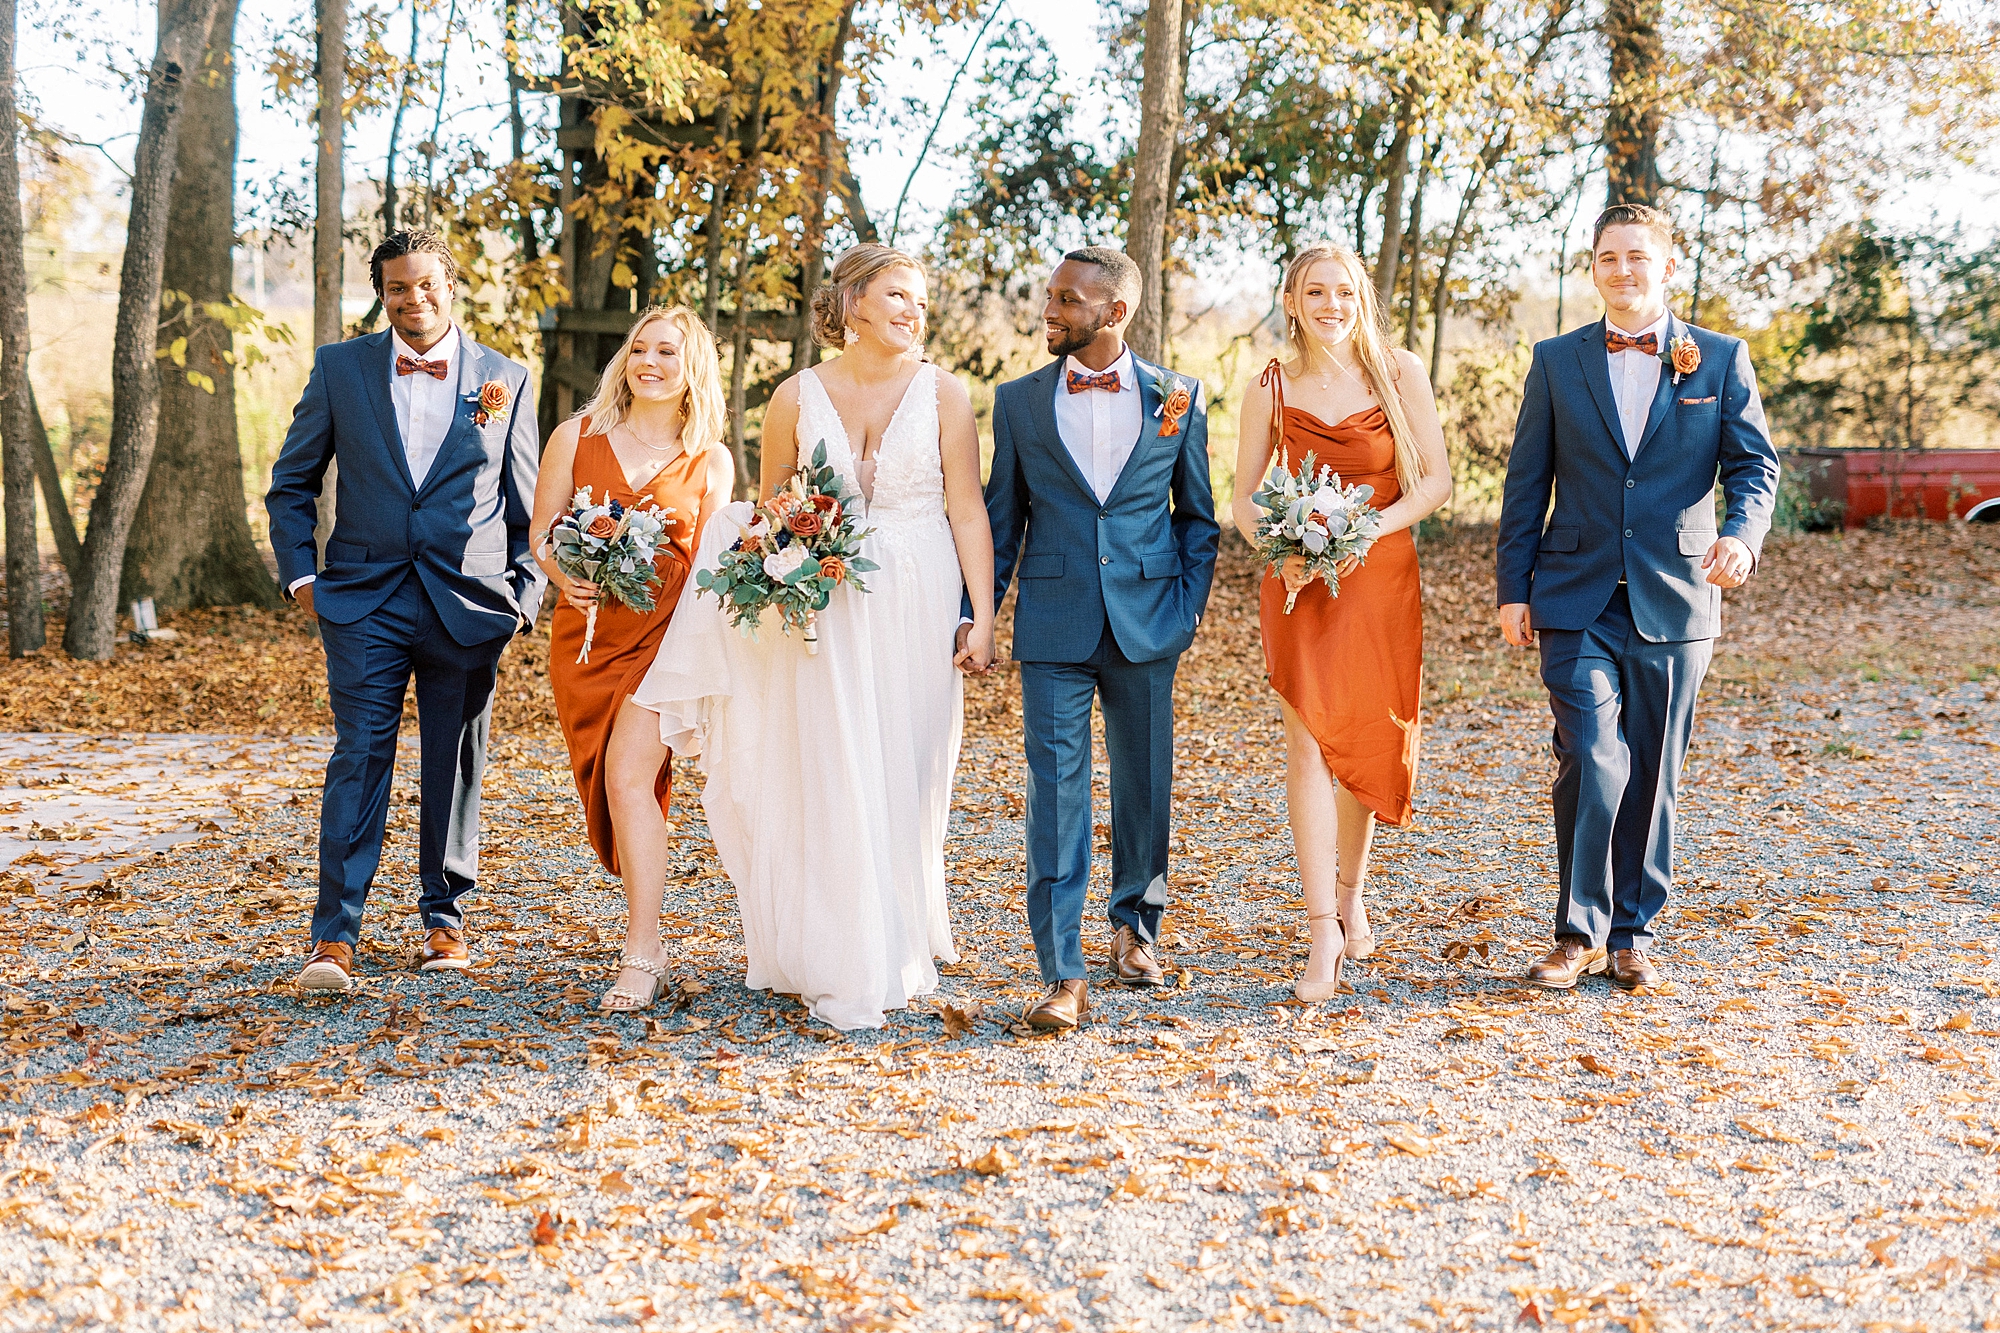 newlyweds walk with wedding party in orange and navy 